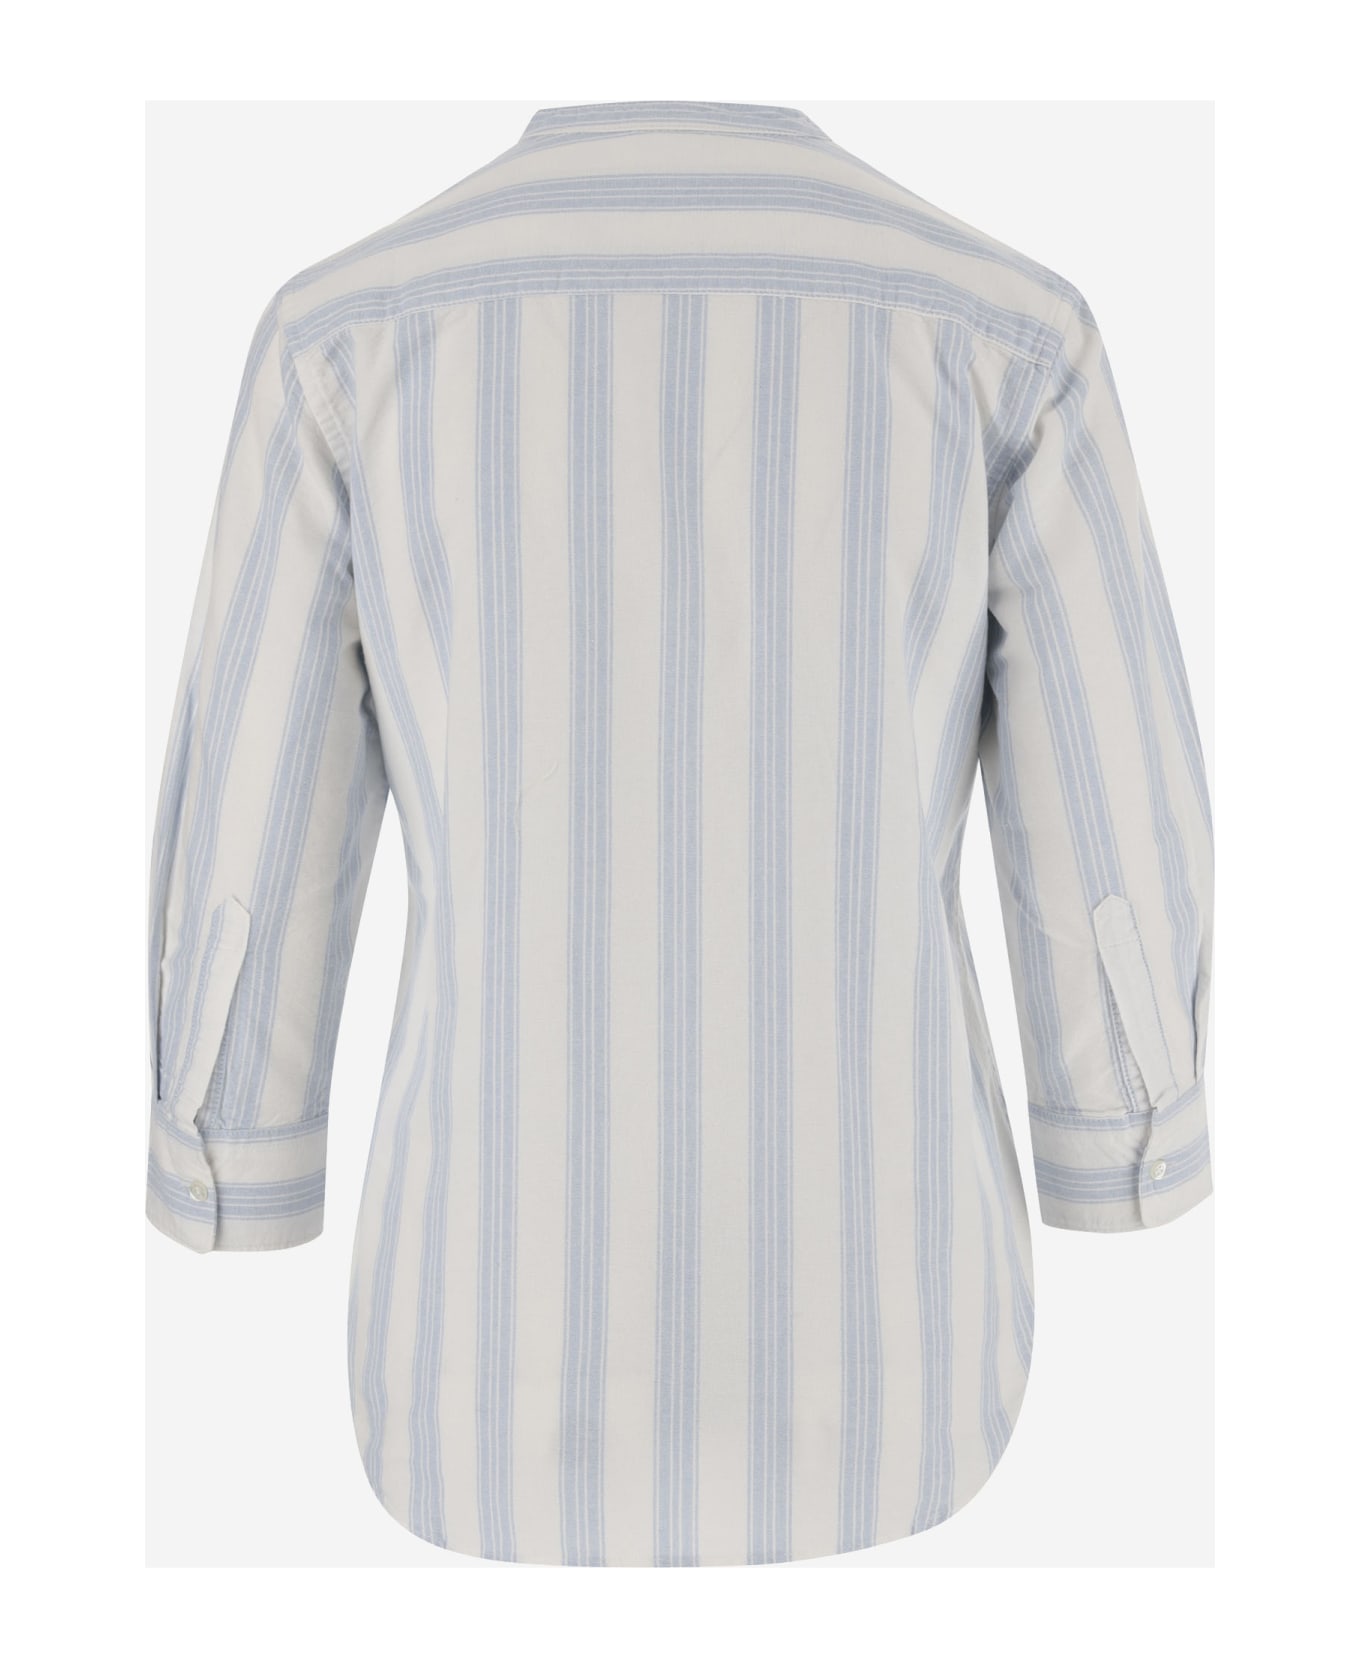 Aspesi Cotton Shirt With Striped Pattern - Clear Blue